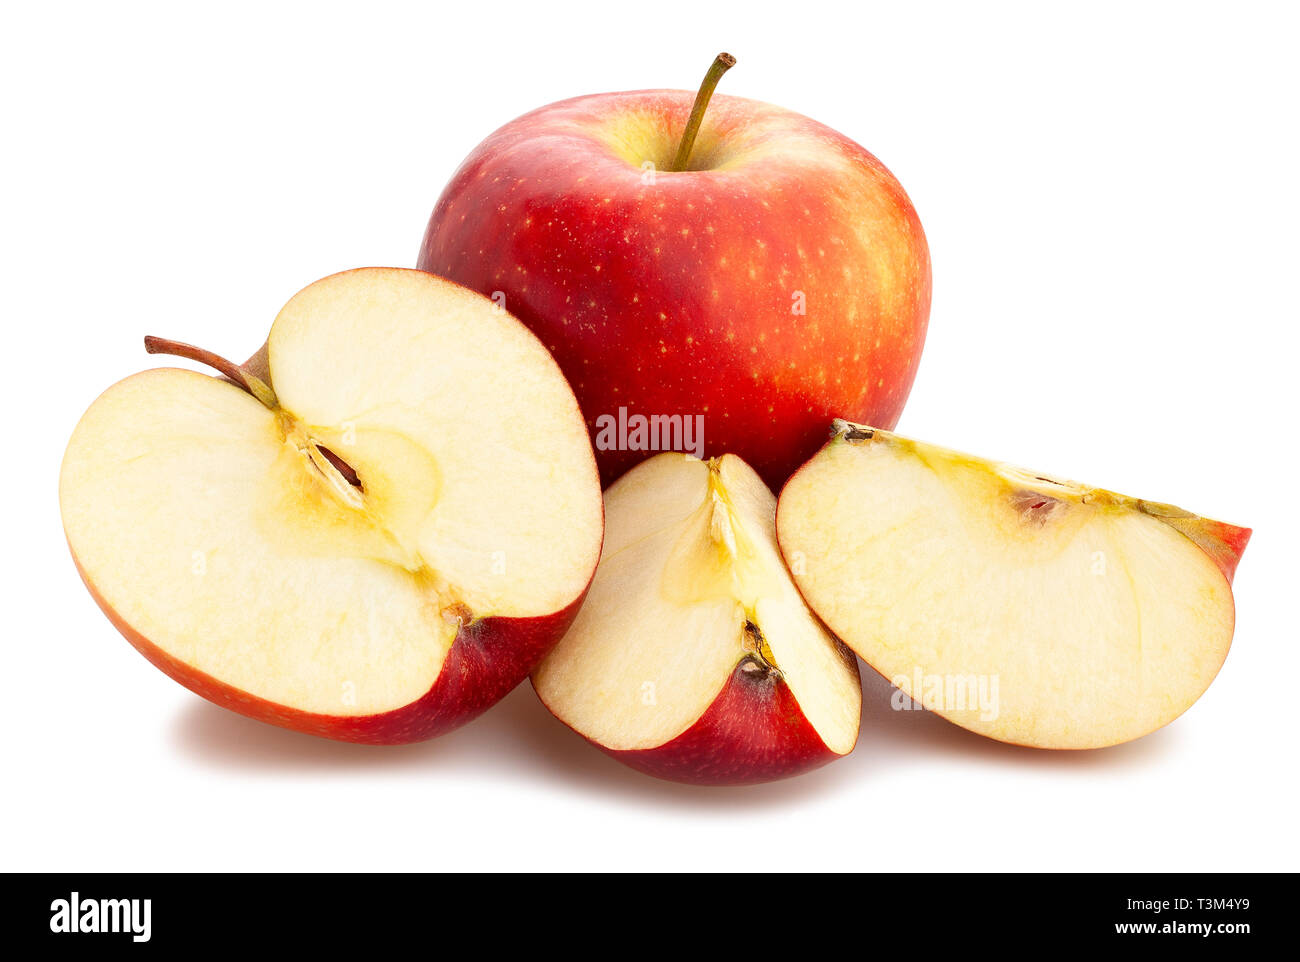 sliced red apples path isolated Stock Photo